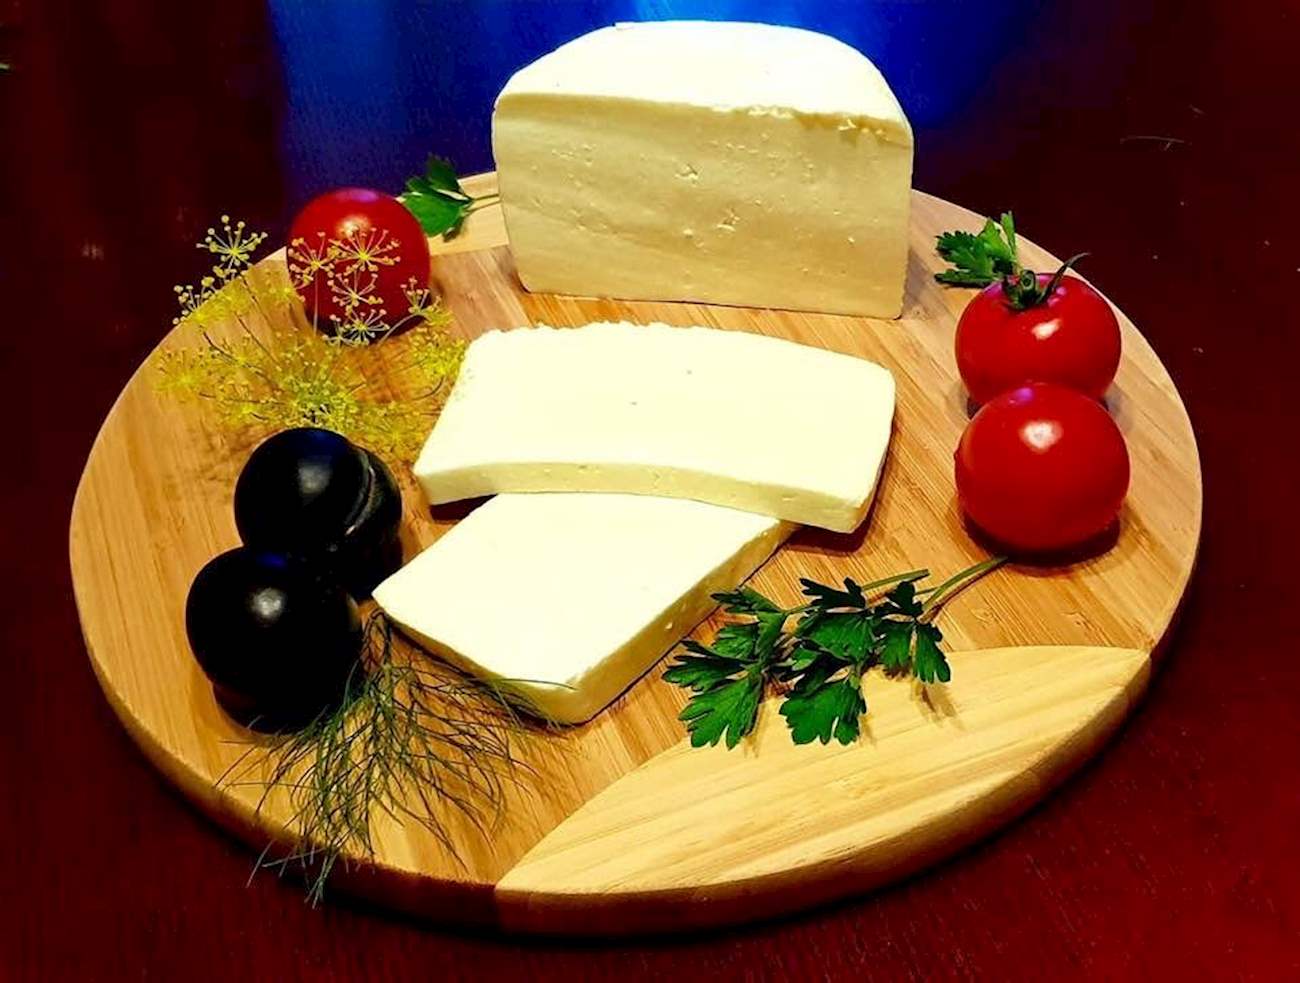 10 Most Popular Central European Rindless Cheeses